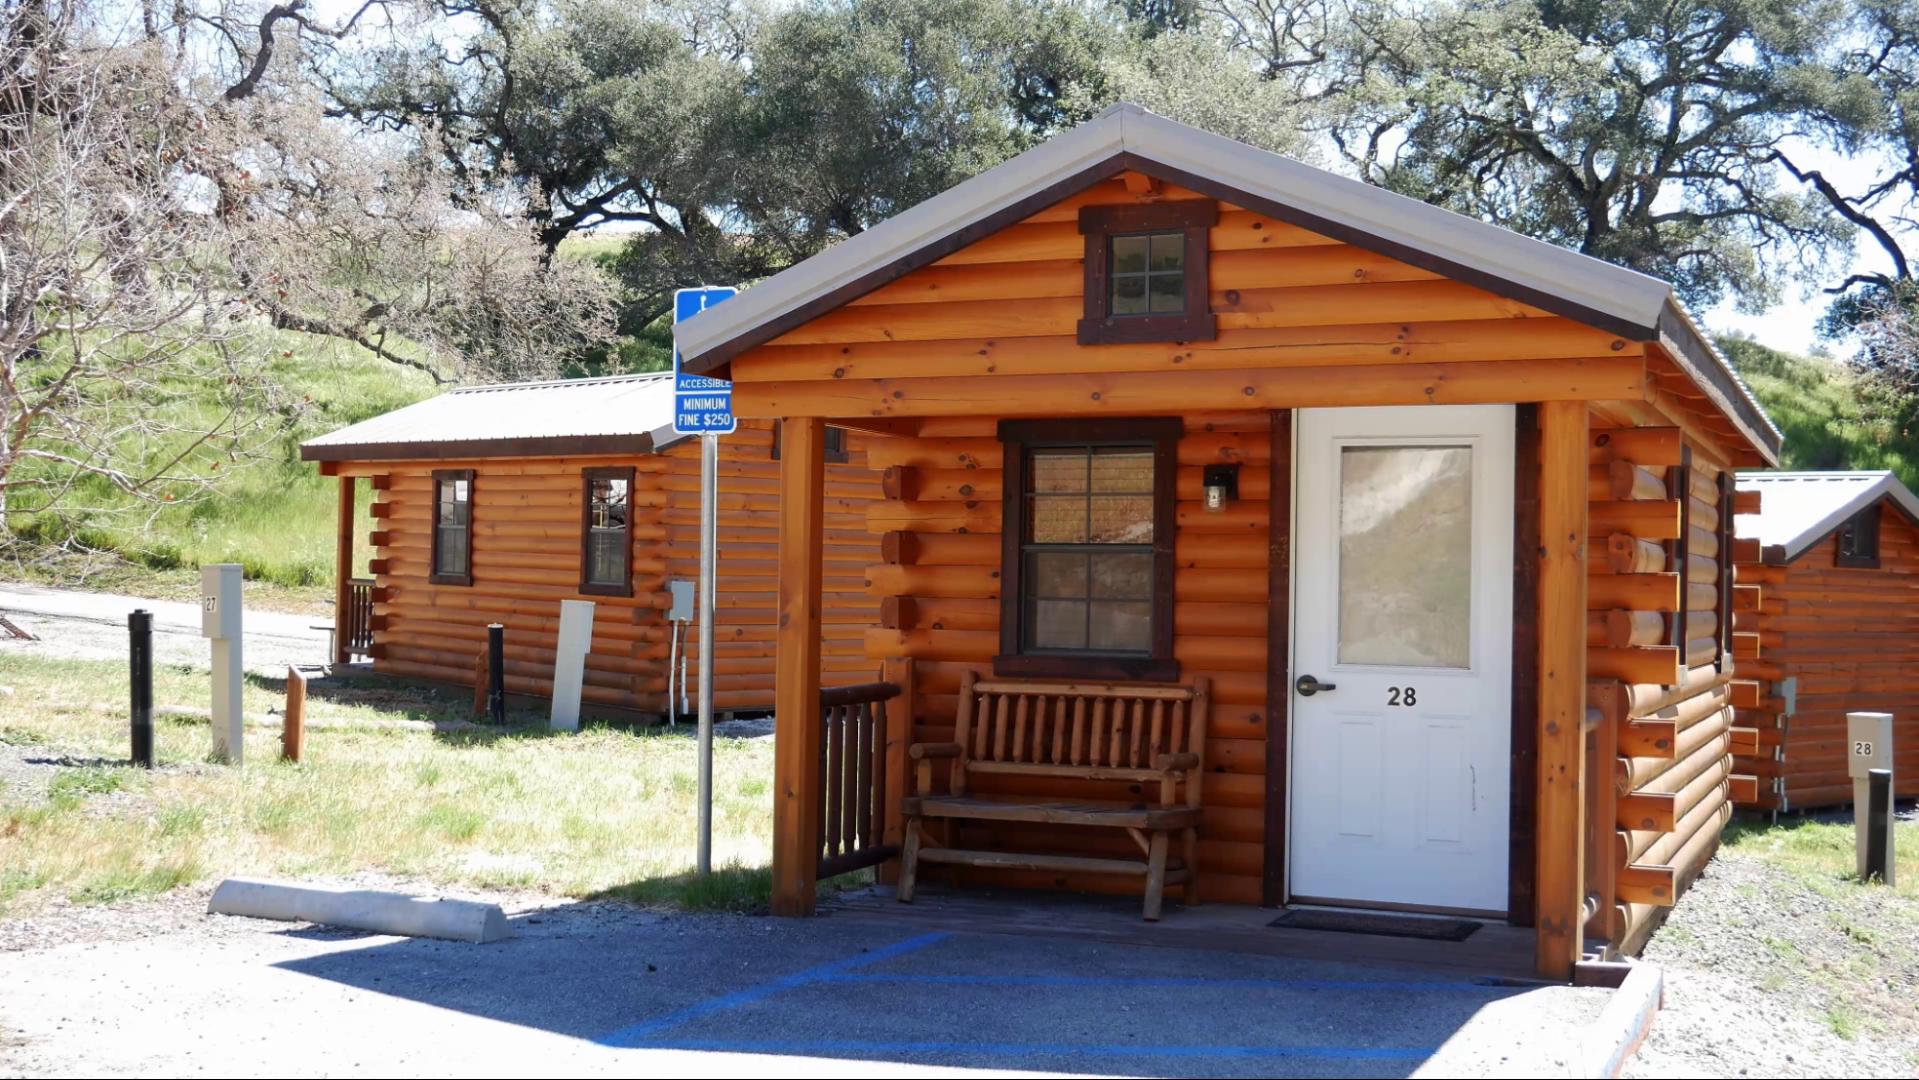 This is one of the cabins available on a nightly basis at Lopez Lake Recreation Site in California. Cabins can sleep 4-6 people. 